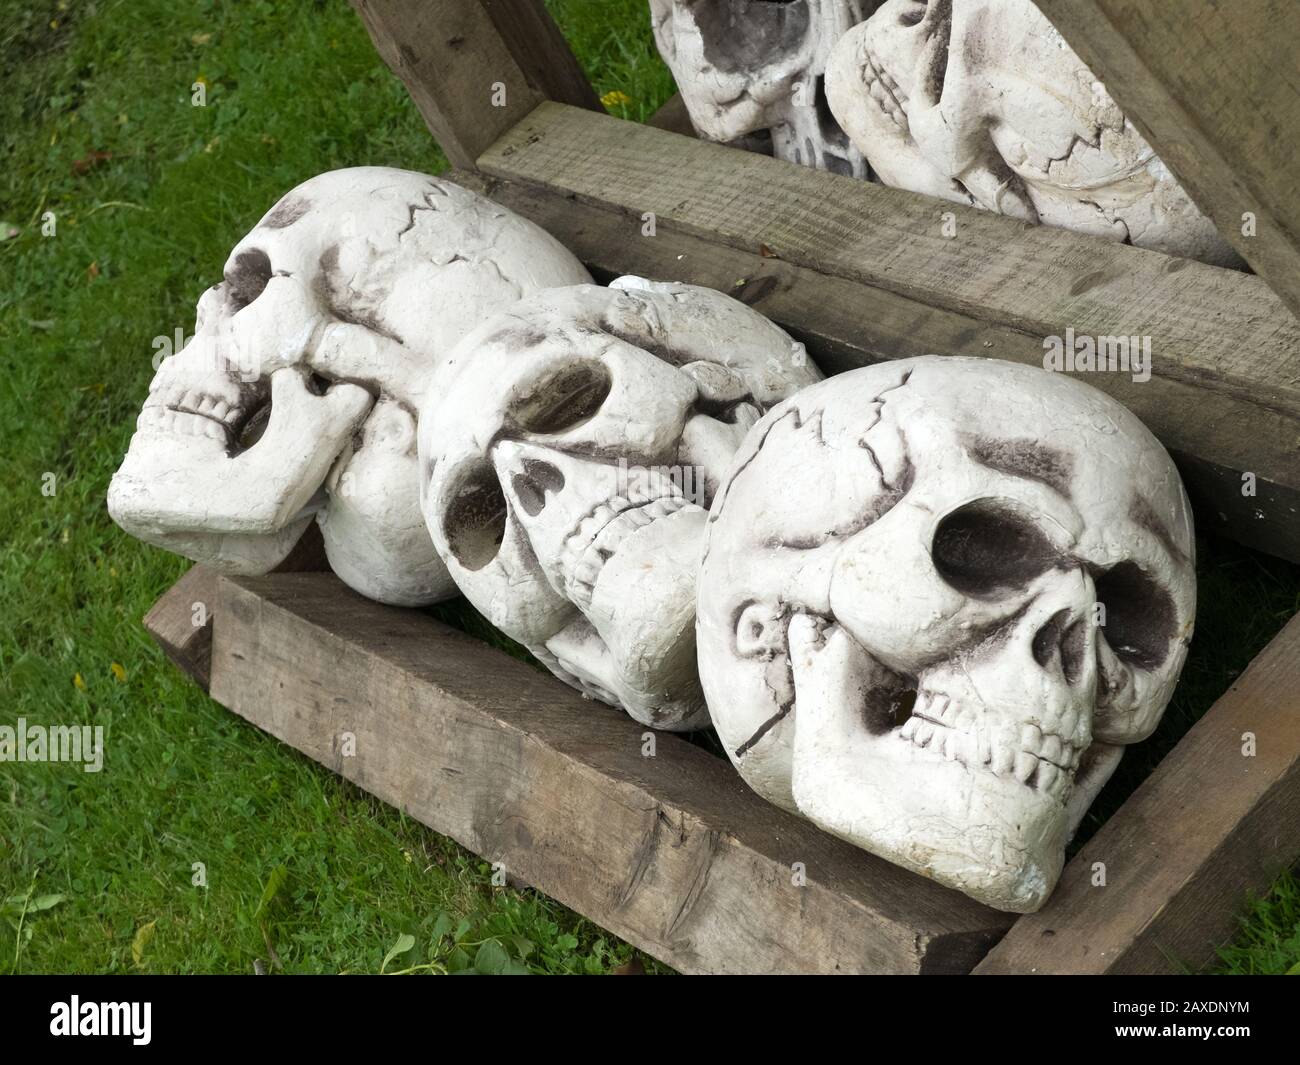 Special effects skull props in a wooden box Stock Photo